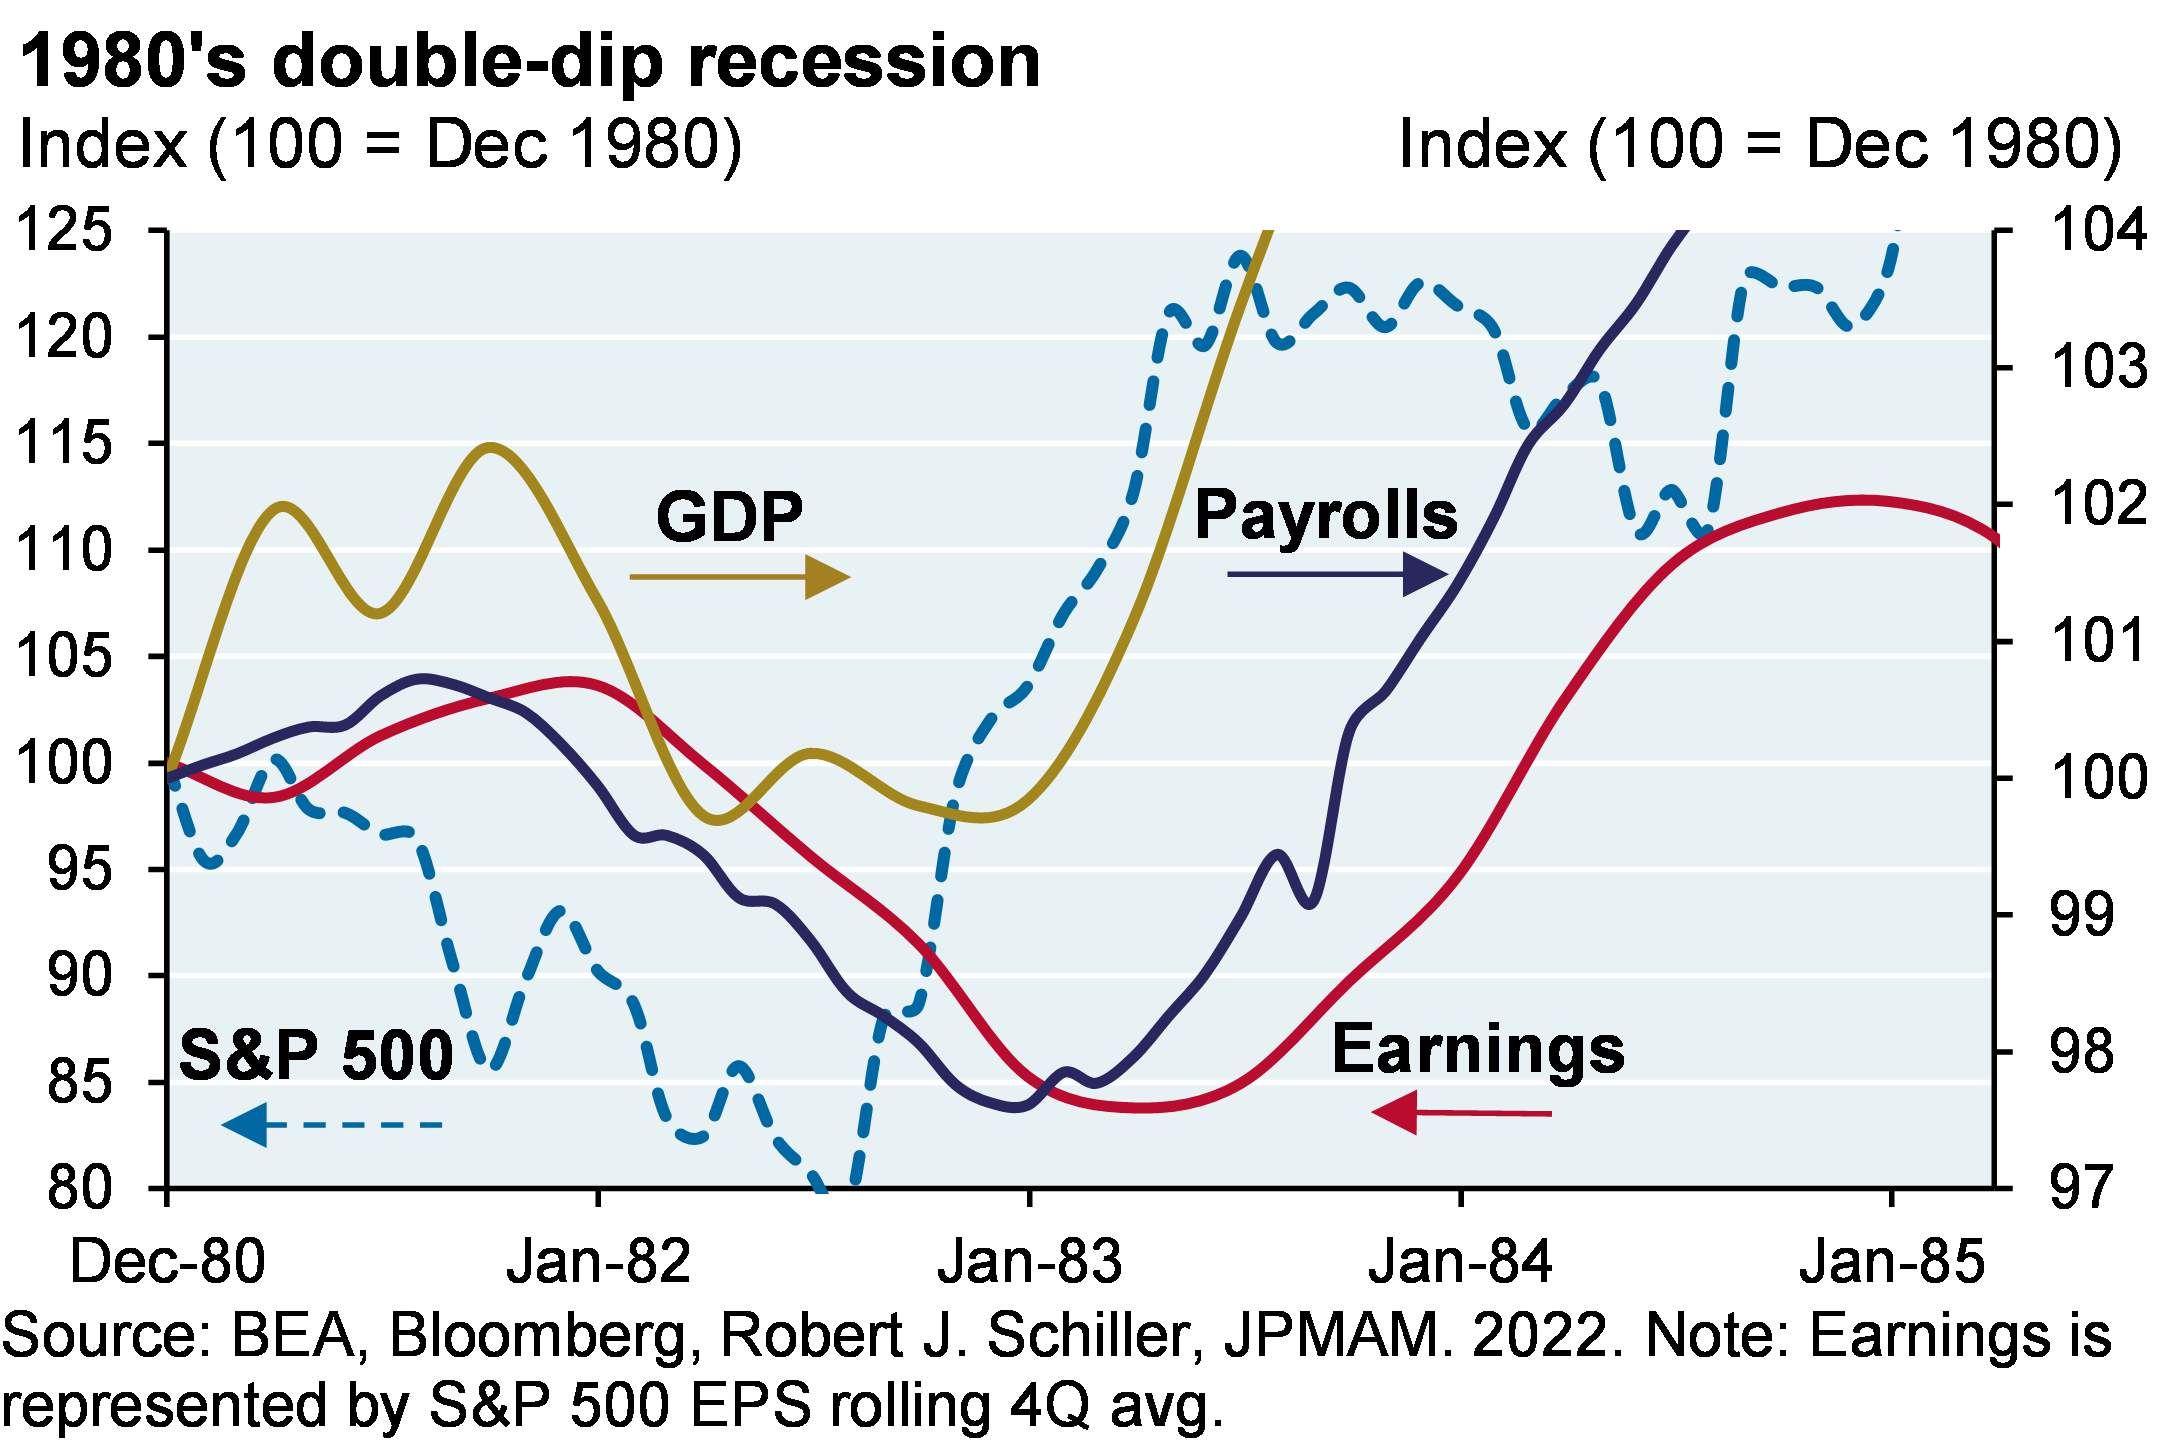 The indexed line chart compares the S&P 500, GDP, Earnings, and Nonfarm Payrolls throughout the double-dip recession from December 1980 to December 1985. The S&P 500 bottomed in July 1982, followed by GDP in September 1982, Payrolls in December 1983 and Earnings in March 1983. 